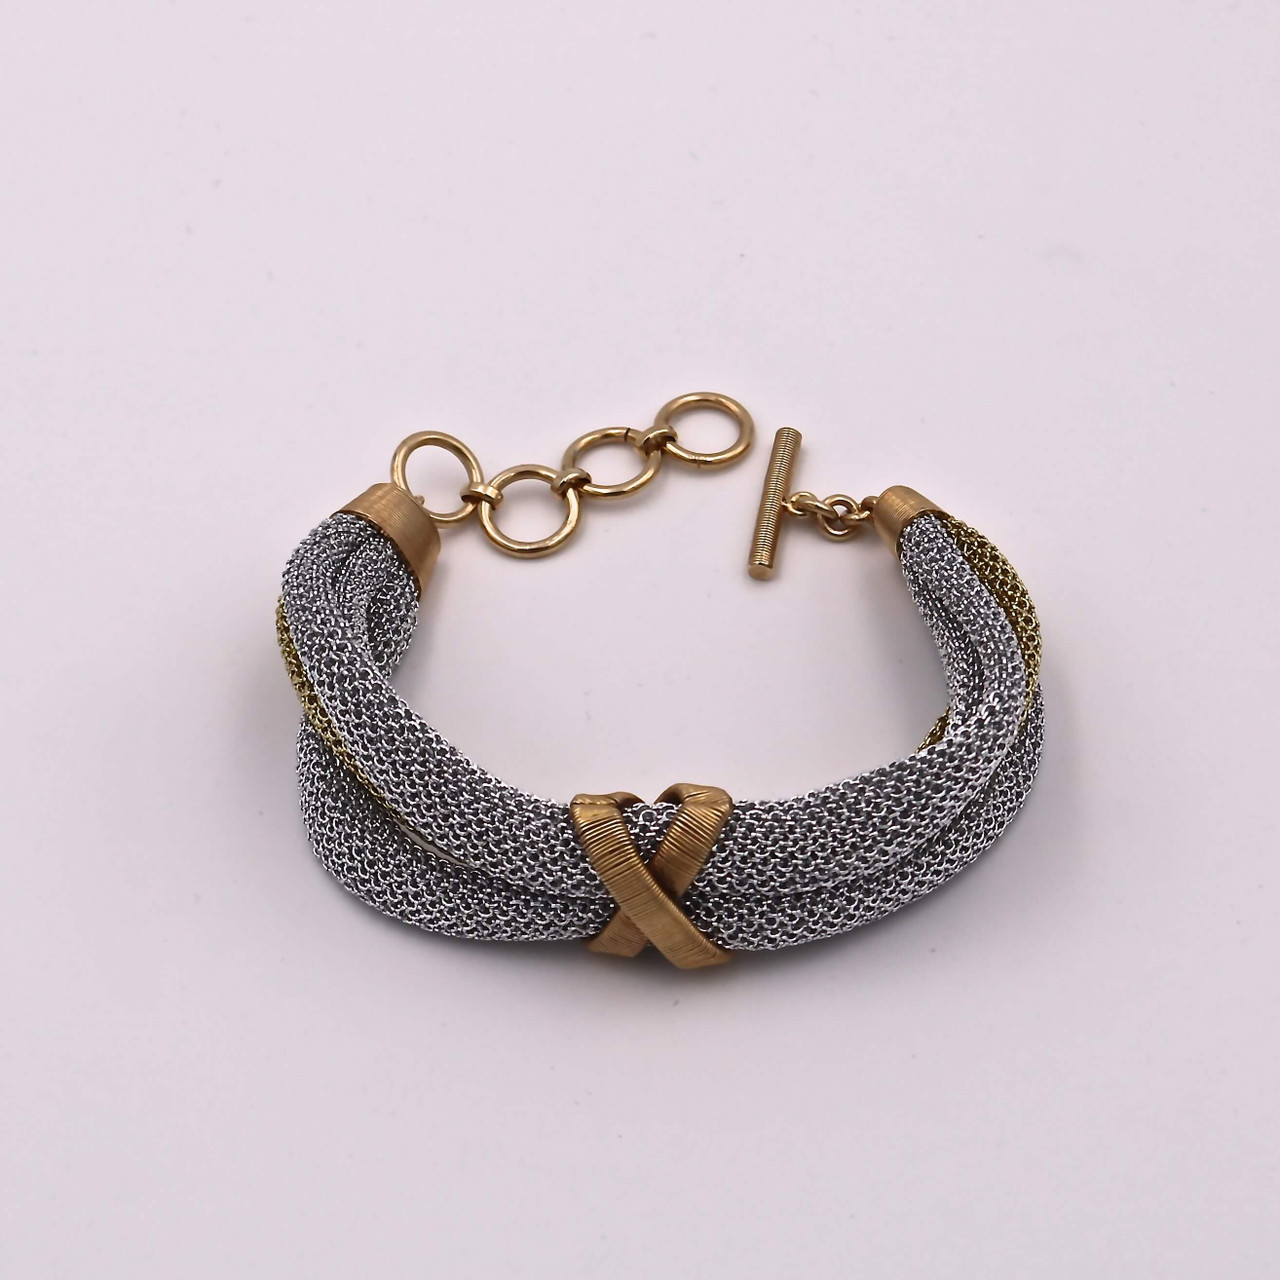 Adami & Martucci Silver and Gold Mesh Twisted Bracelet With Criss Cross ...